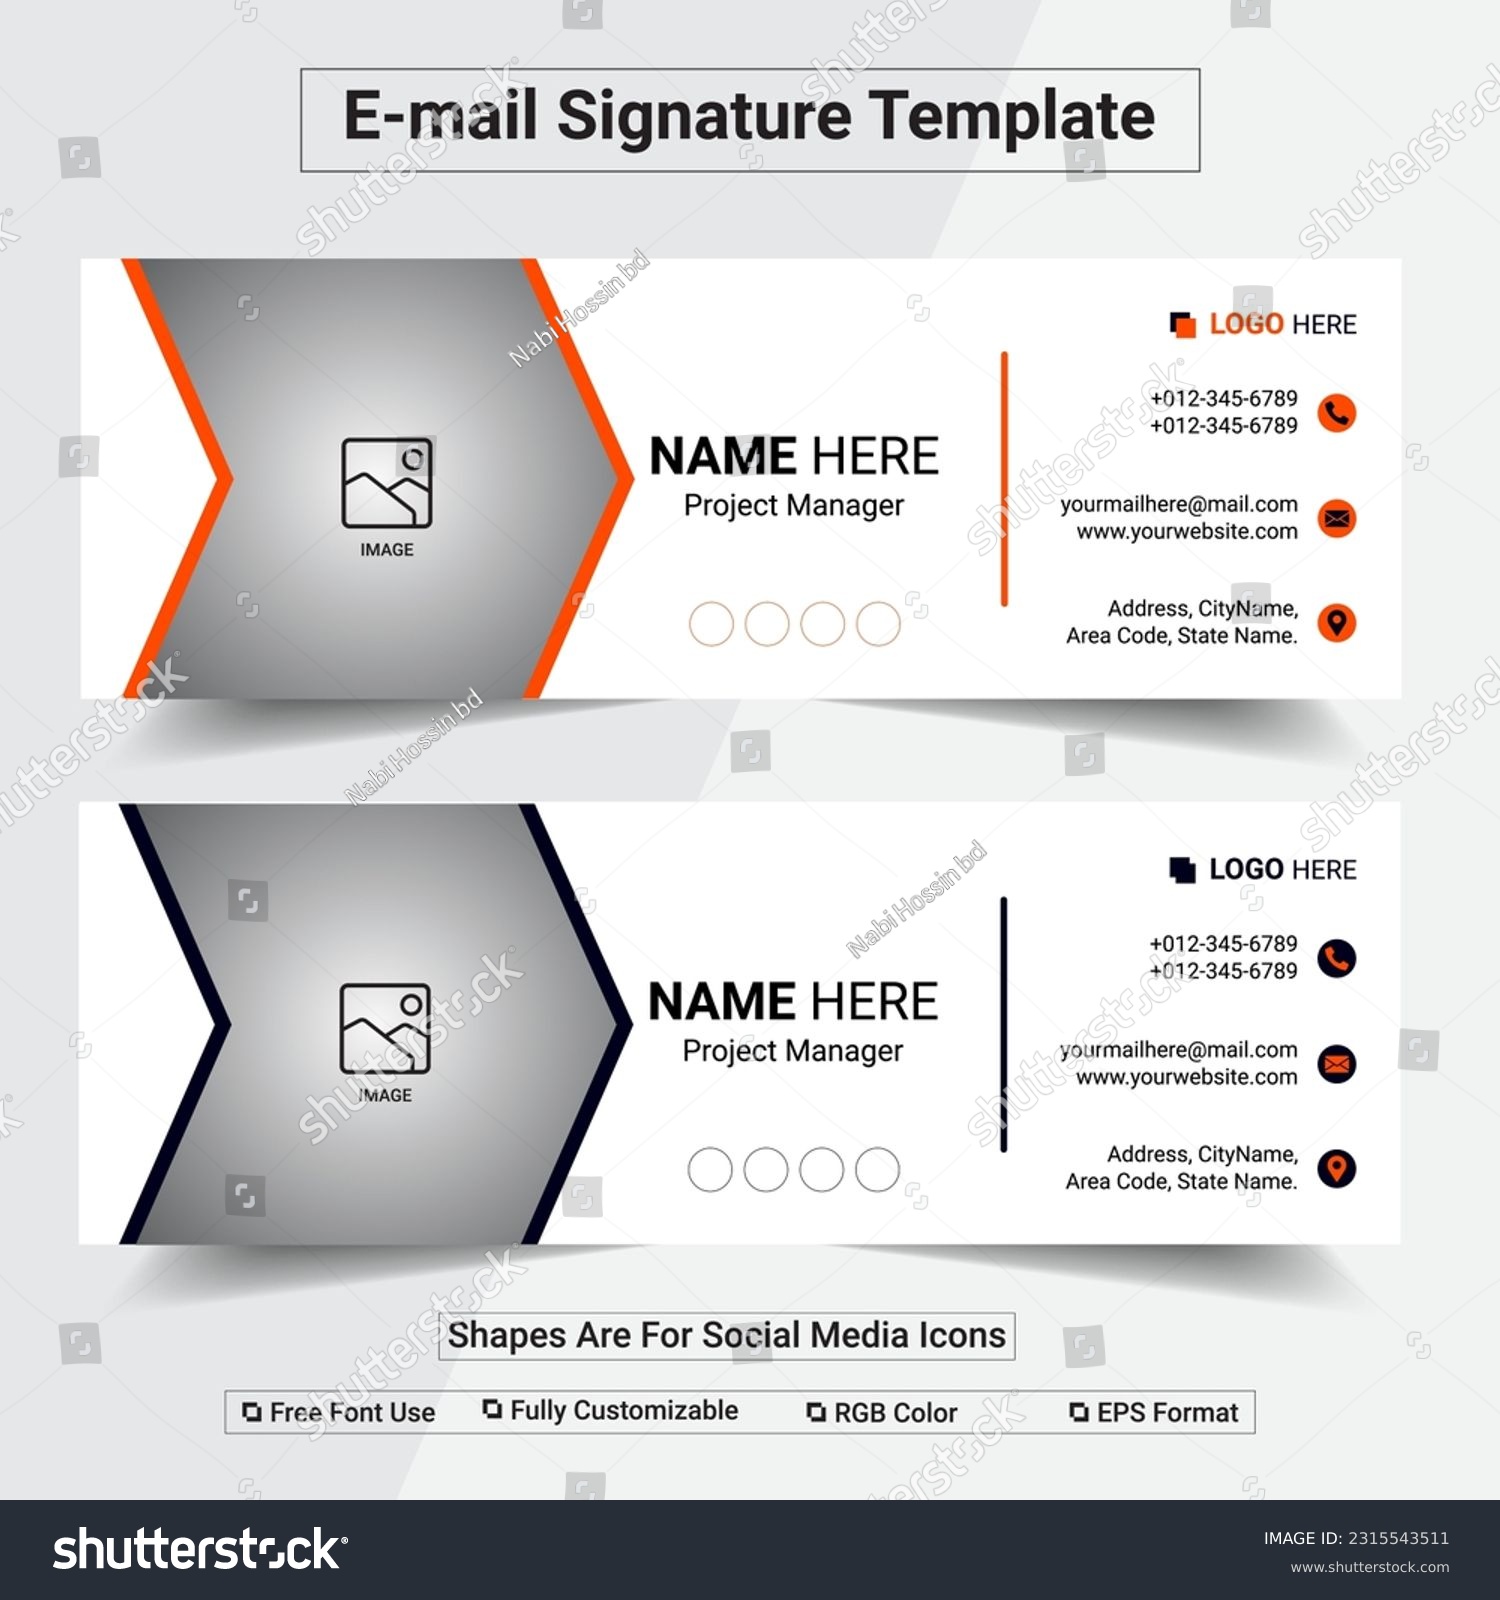 SVG of E-mail Signature Design Template.  clickable signature, html email signature, email template, signature, 	business, business email, contact, contact message, creative email, svg